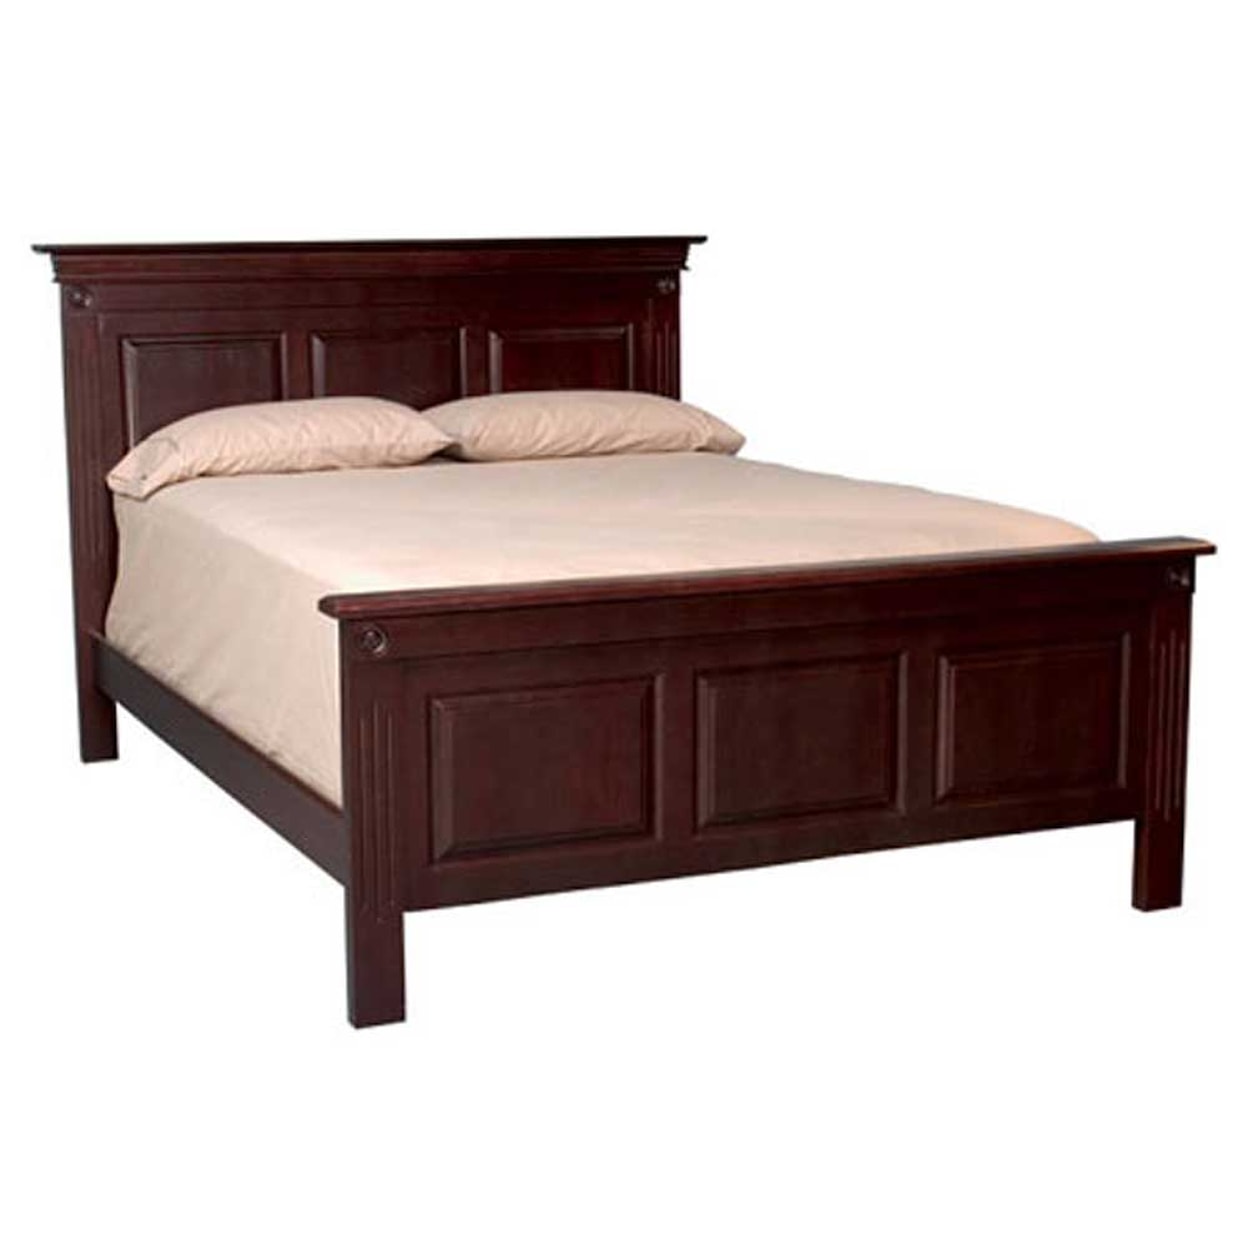 Simply Amish Imperial Amish California King 3-Panel Bed